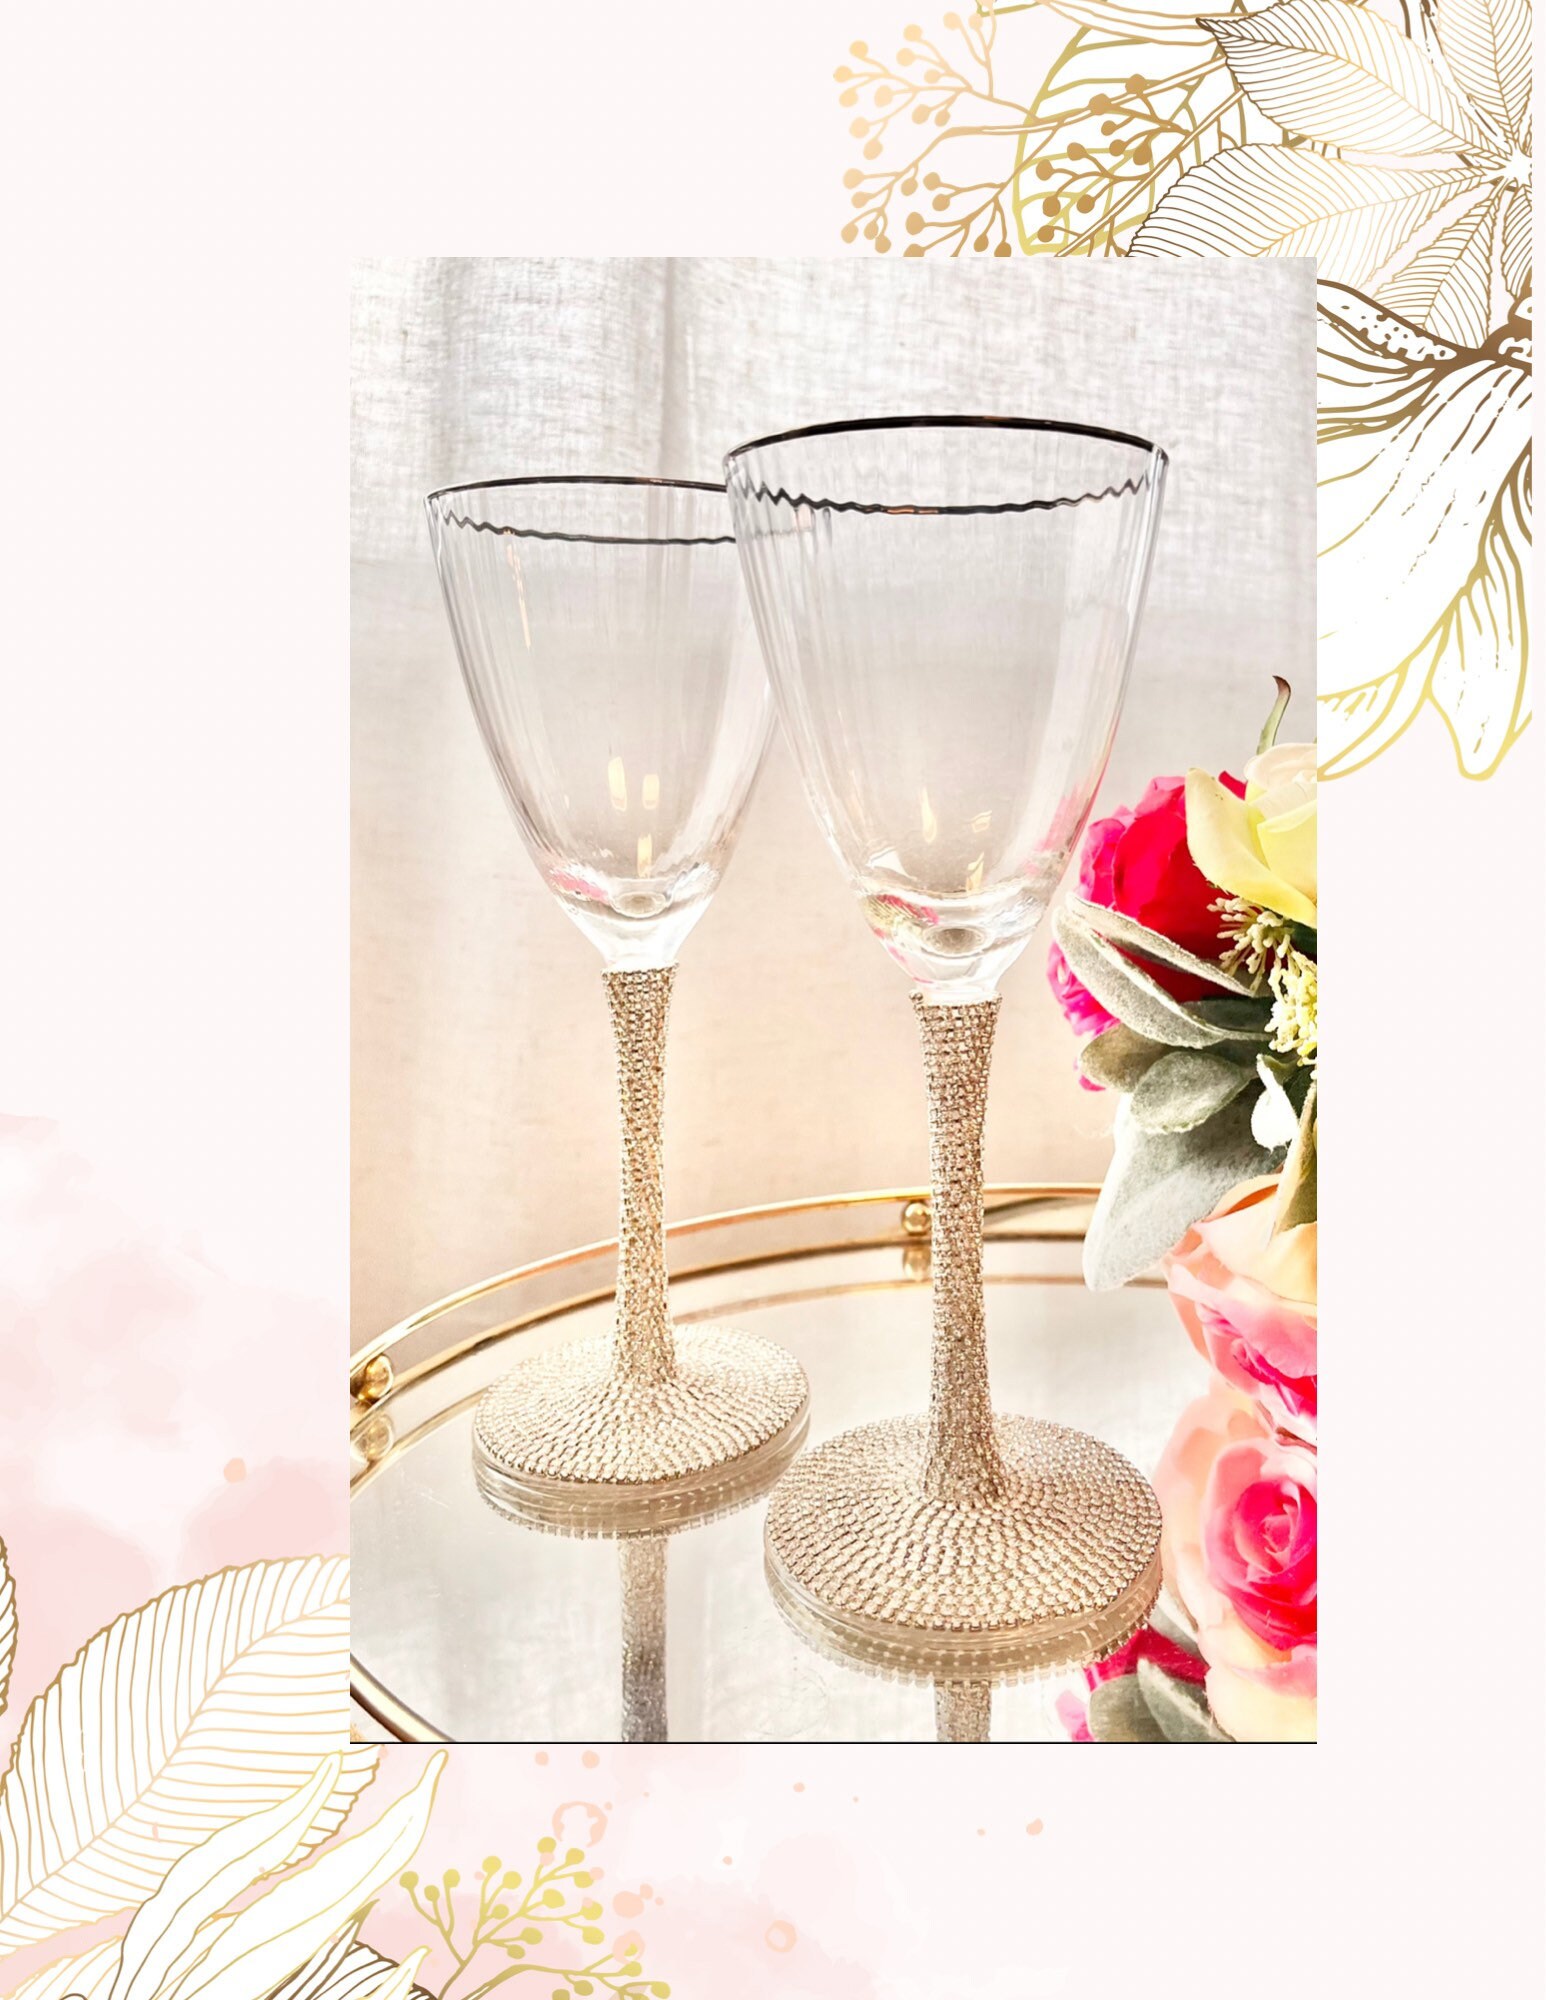 Women Pearl and Rhinestone Stemmed Wine Glasses - Back to the South Bling